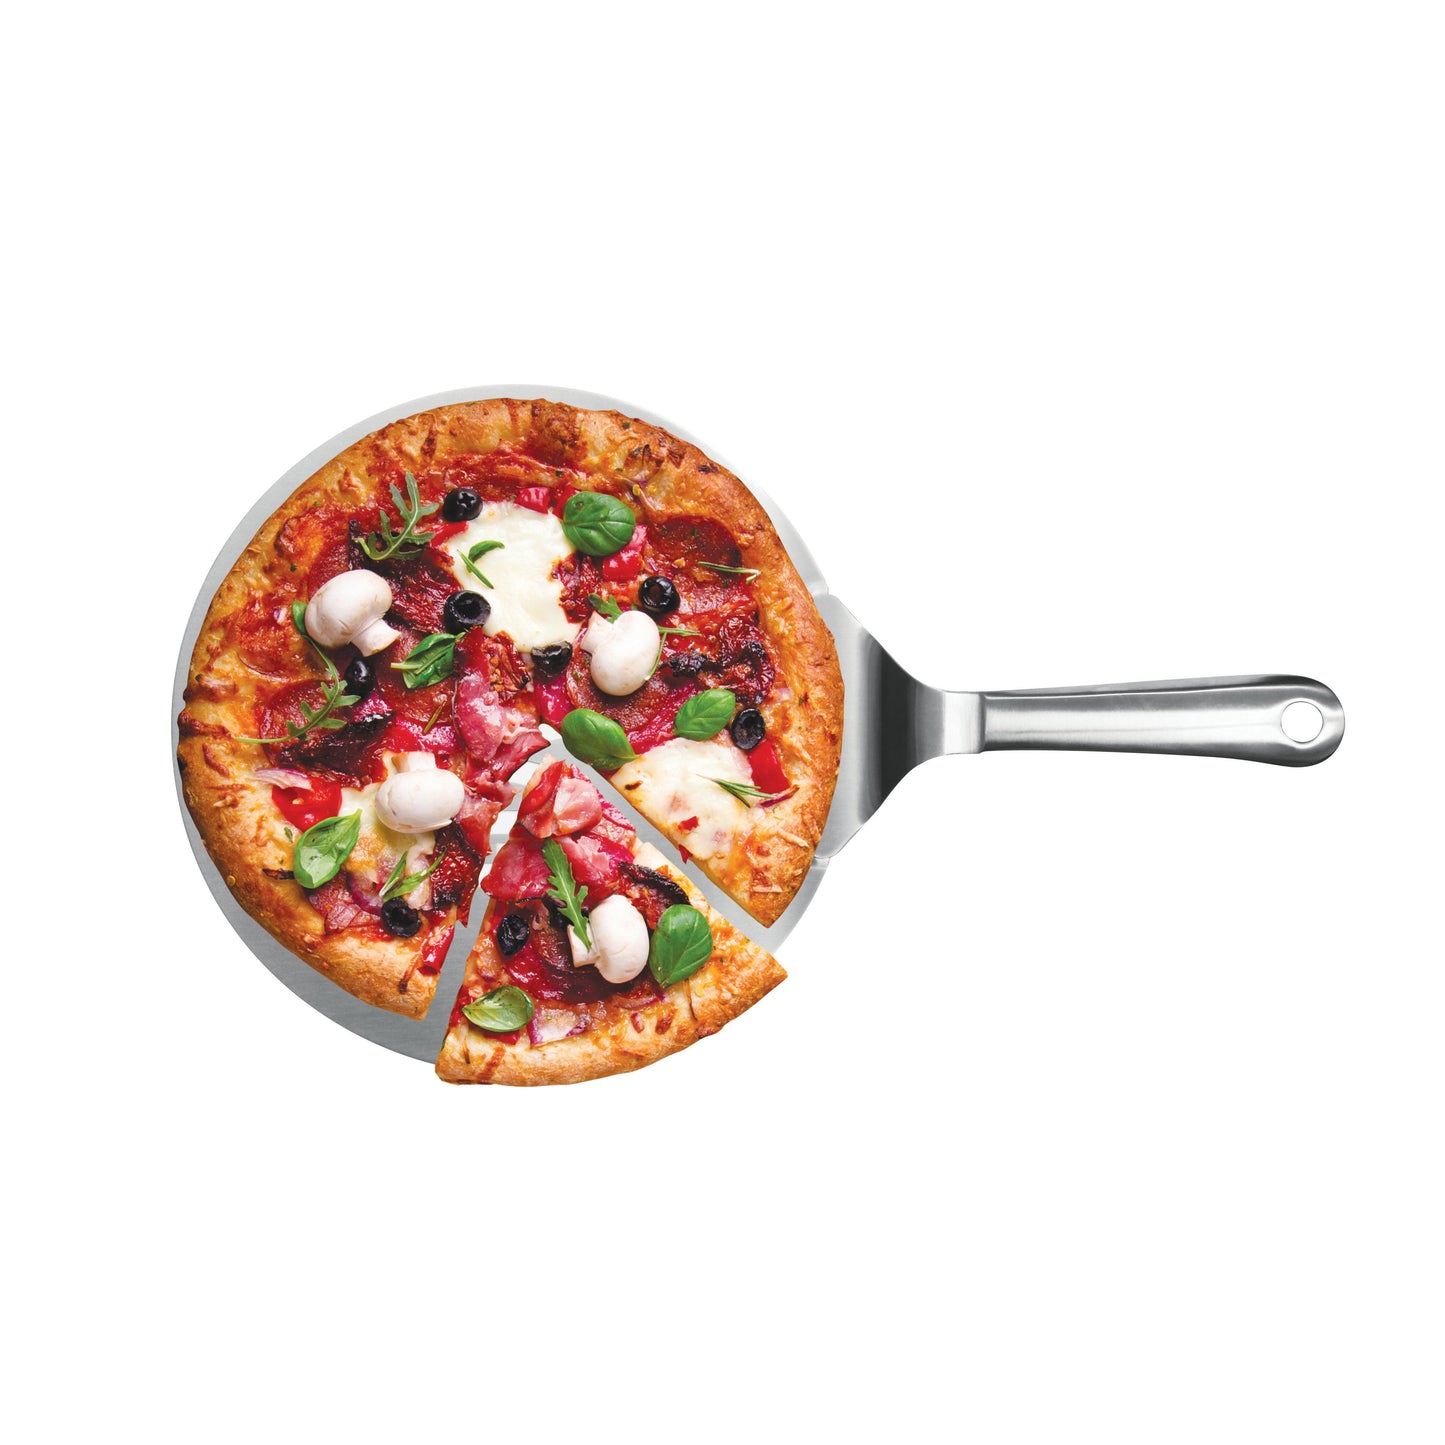 STAINLESS STEEL PIZZA PEEL LIFTER